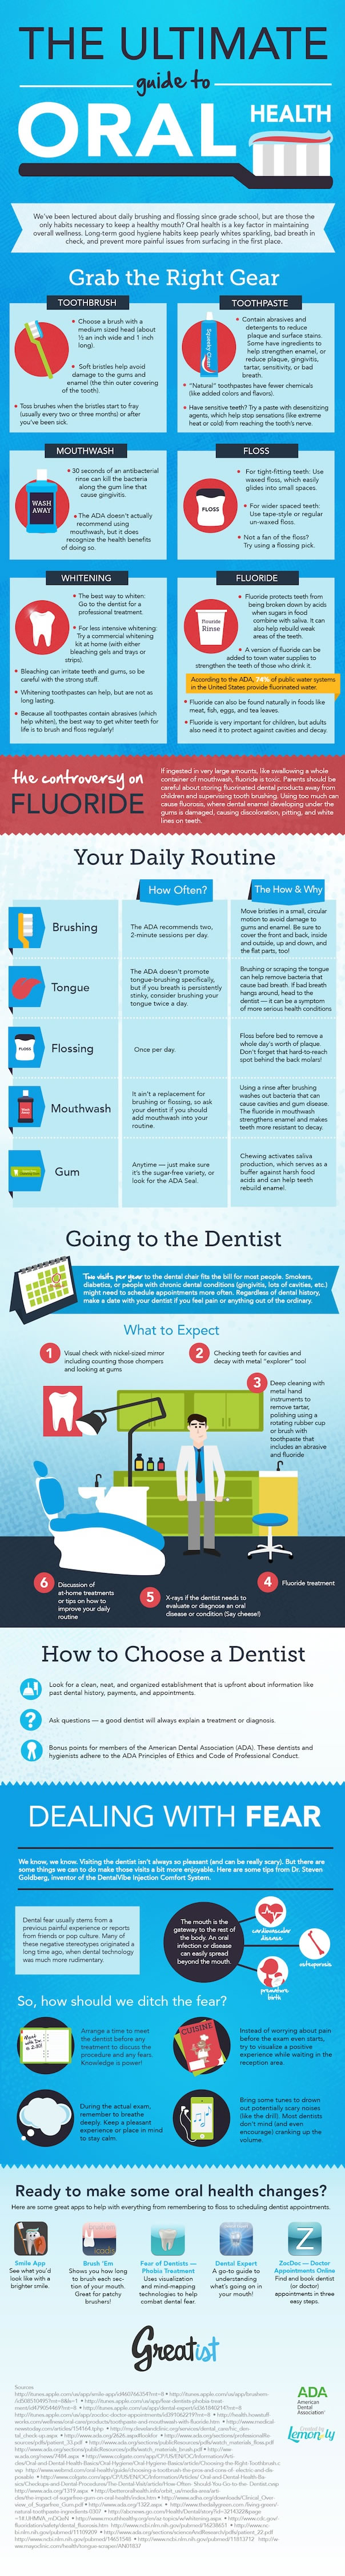 The ultimate guide to oral health